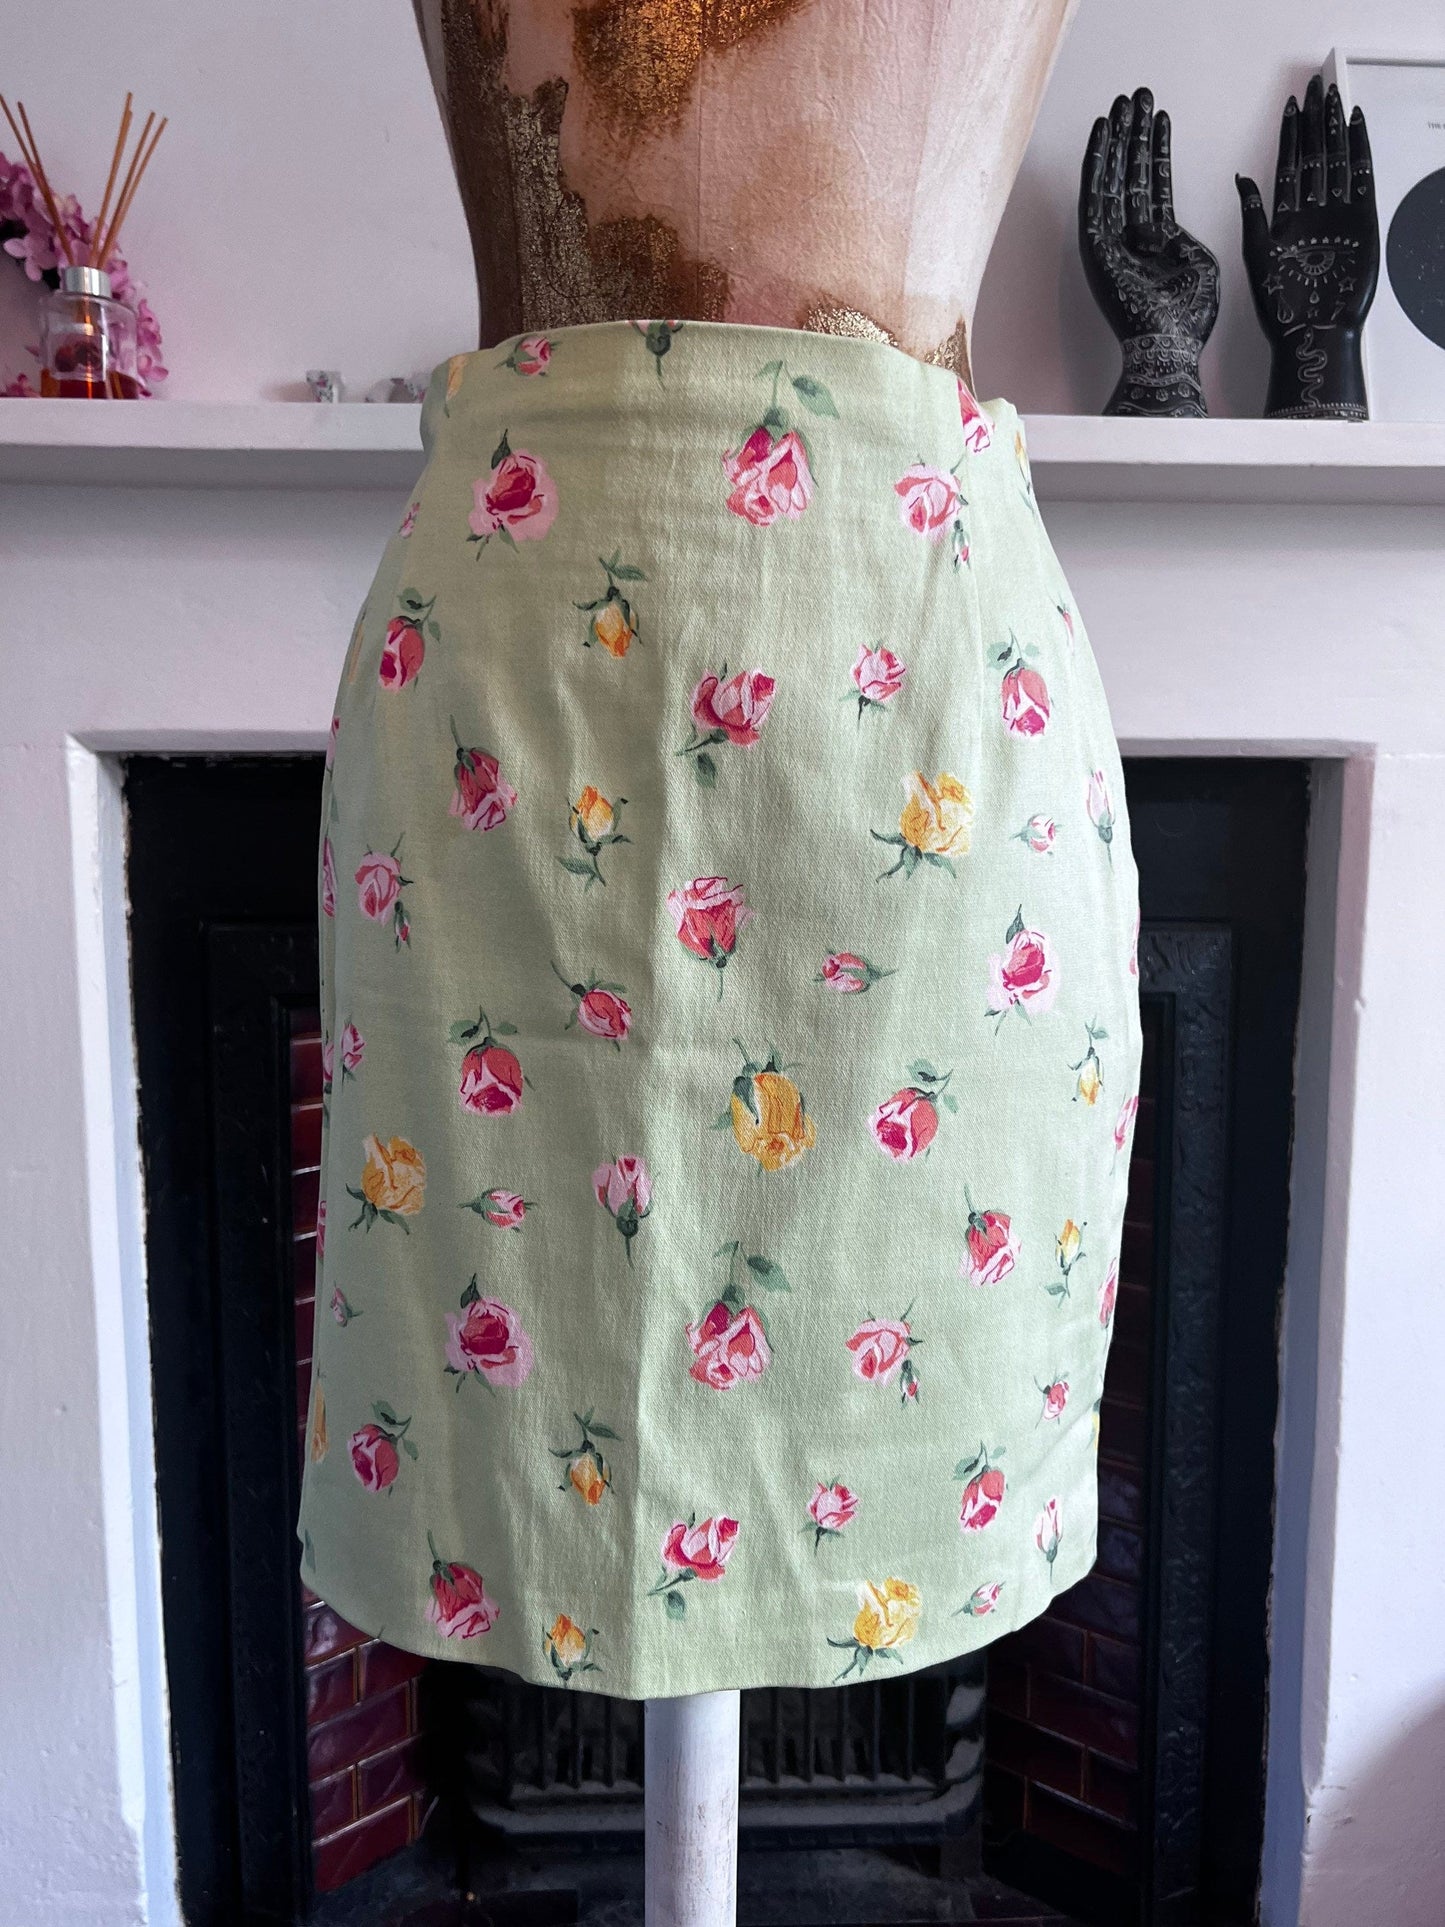 Vintage 90s M&S green floral skirt - pink yellow flowered skirt with back zip - stretch Lyrca pencil skirt